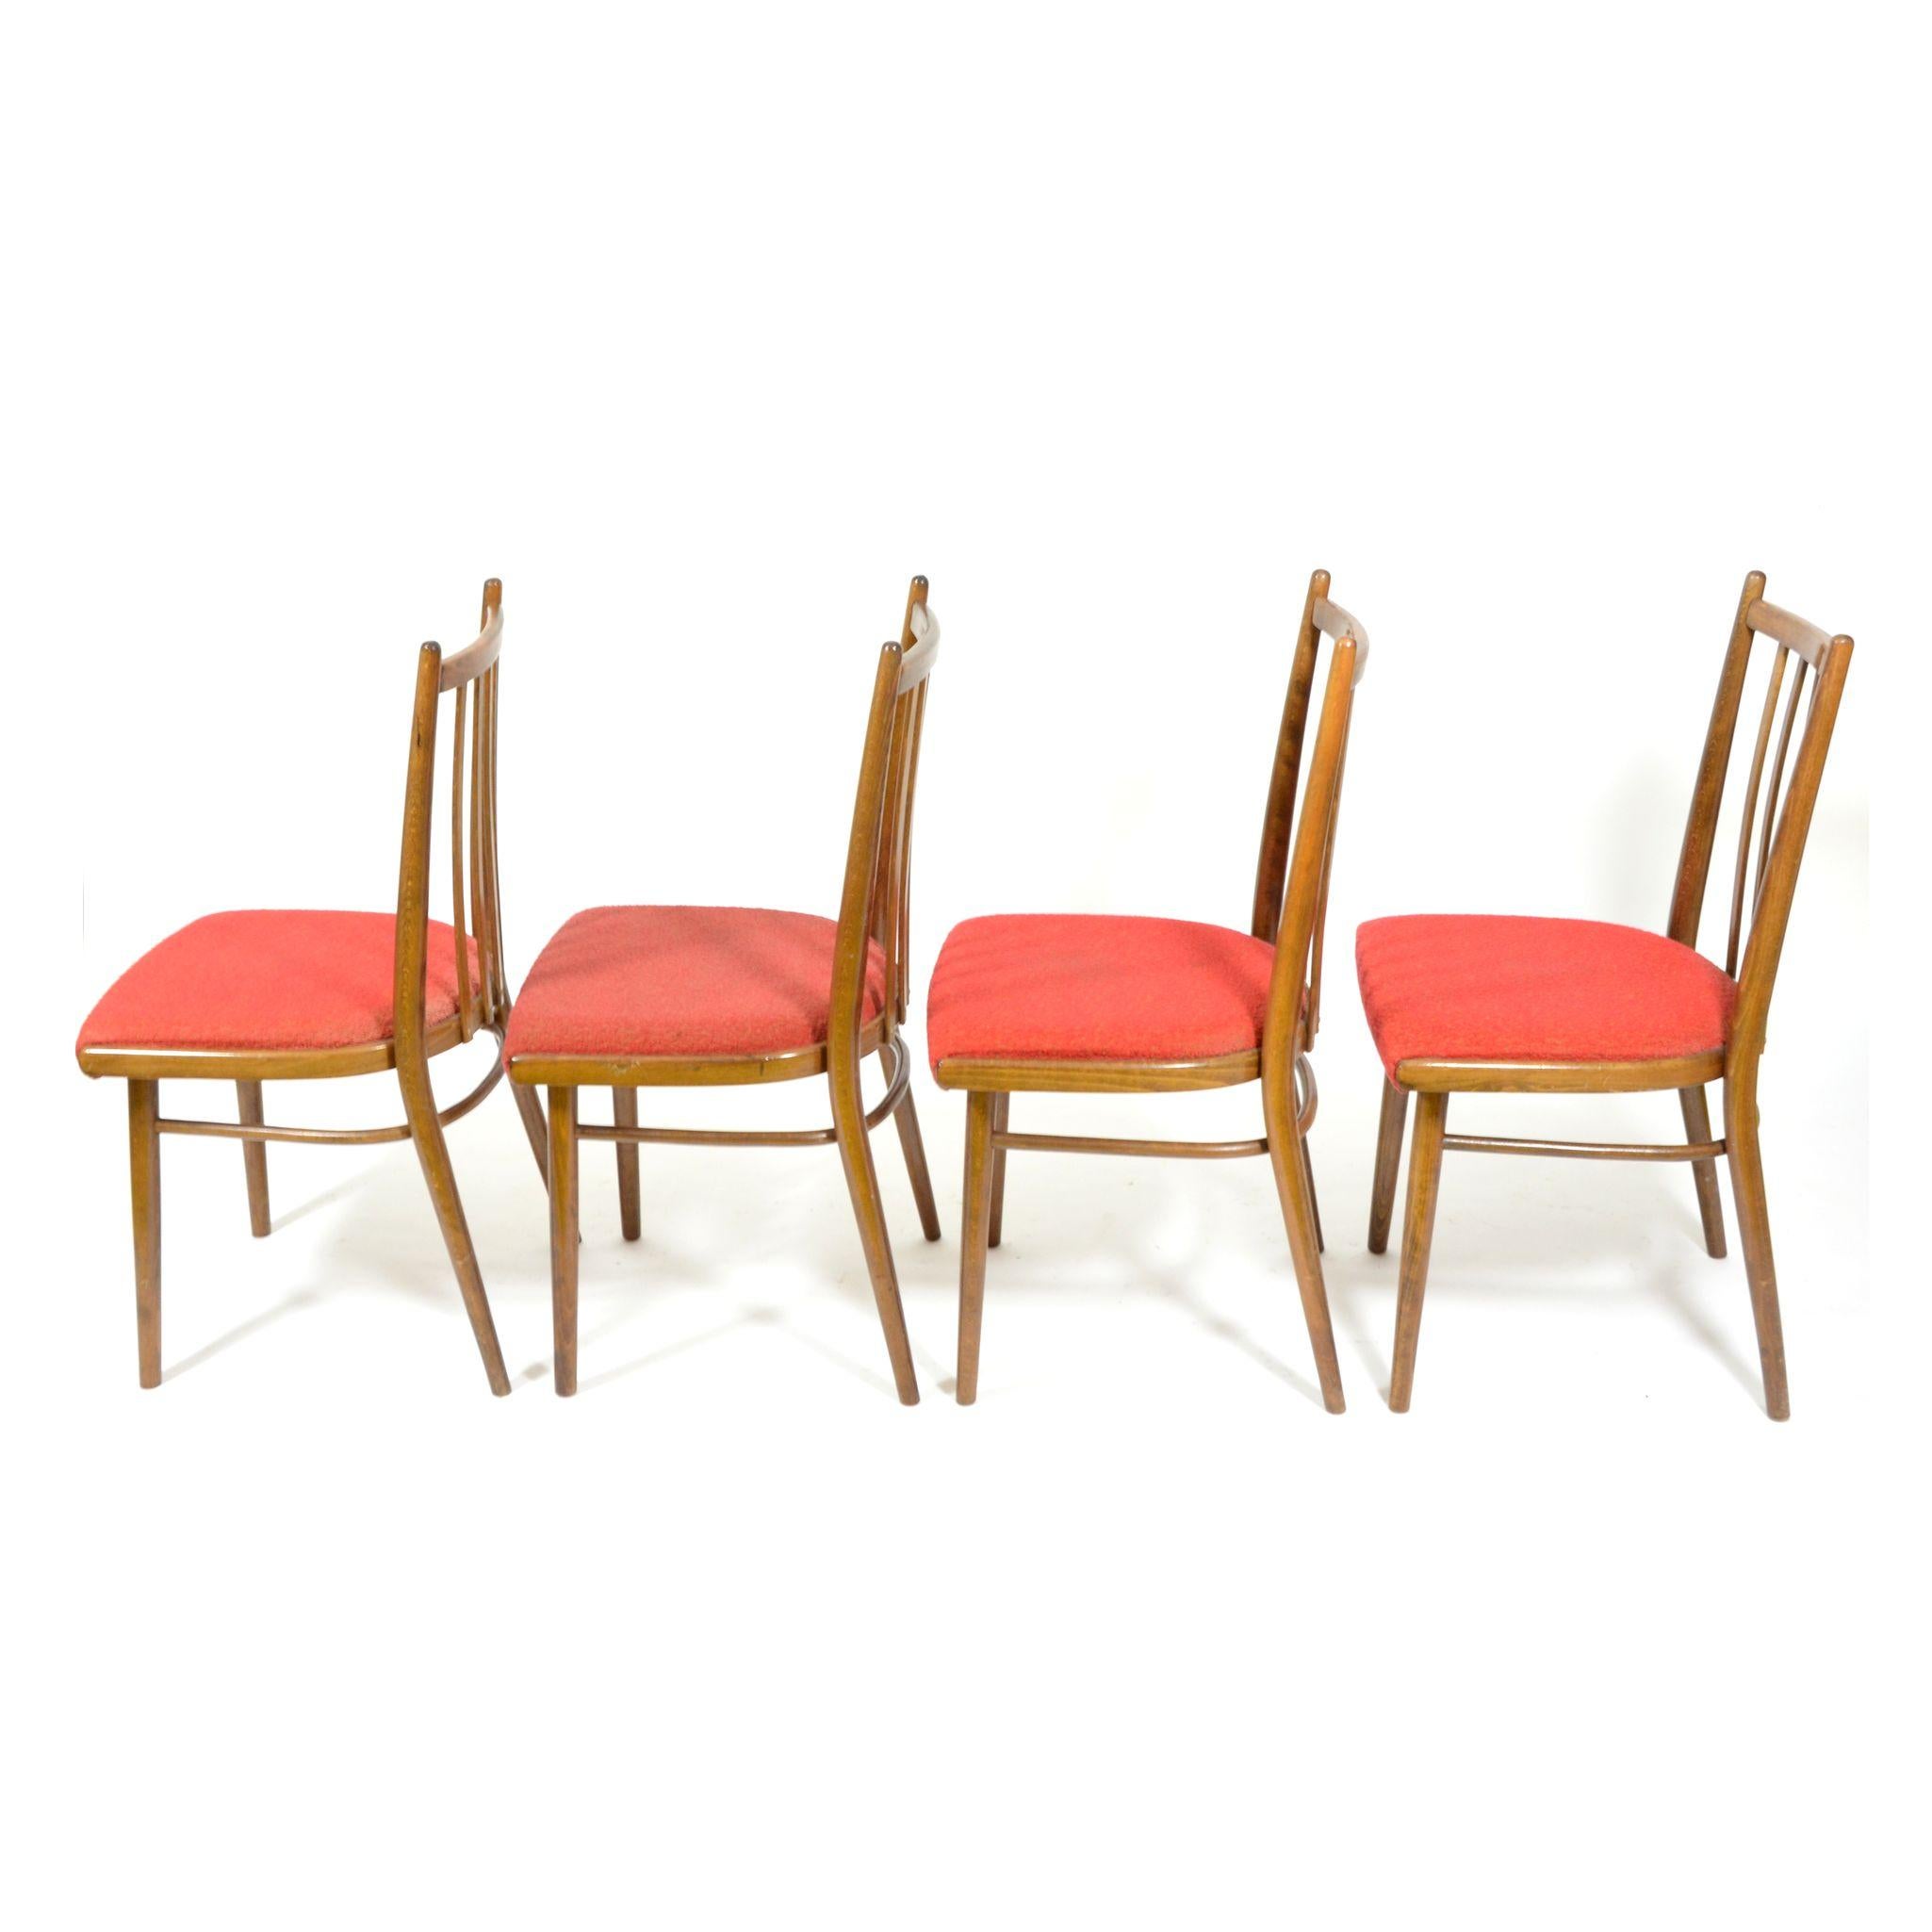 Fabric Set of Four Vintage Dining Chairs, Red Upholstered, Czechoslovakia, 1970s For Sale